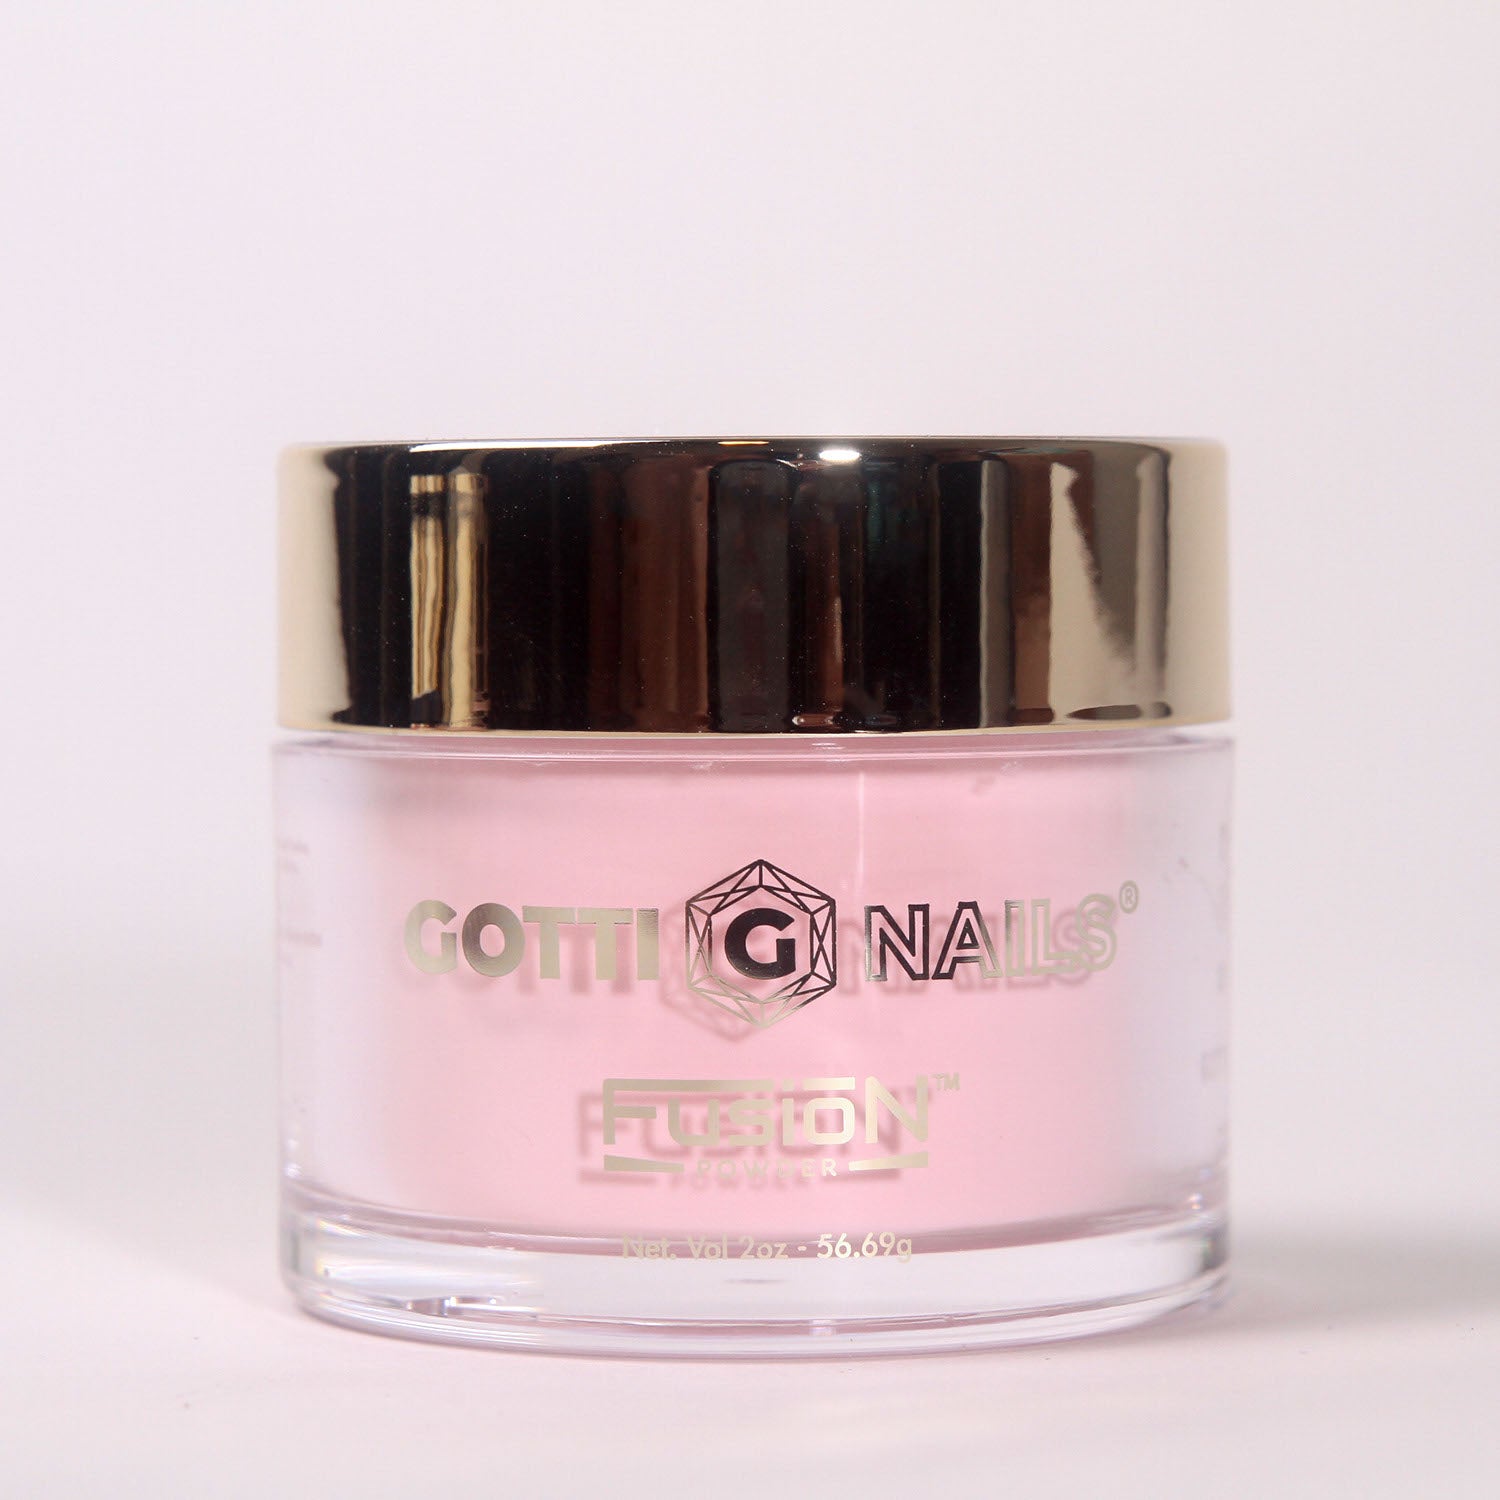 #20F Gotti Fusion Powder - The Queen Bee Is Me